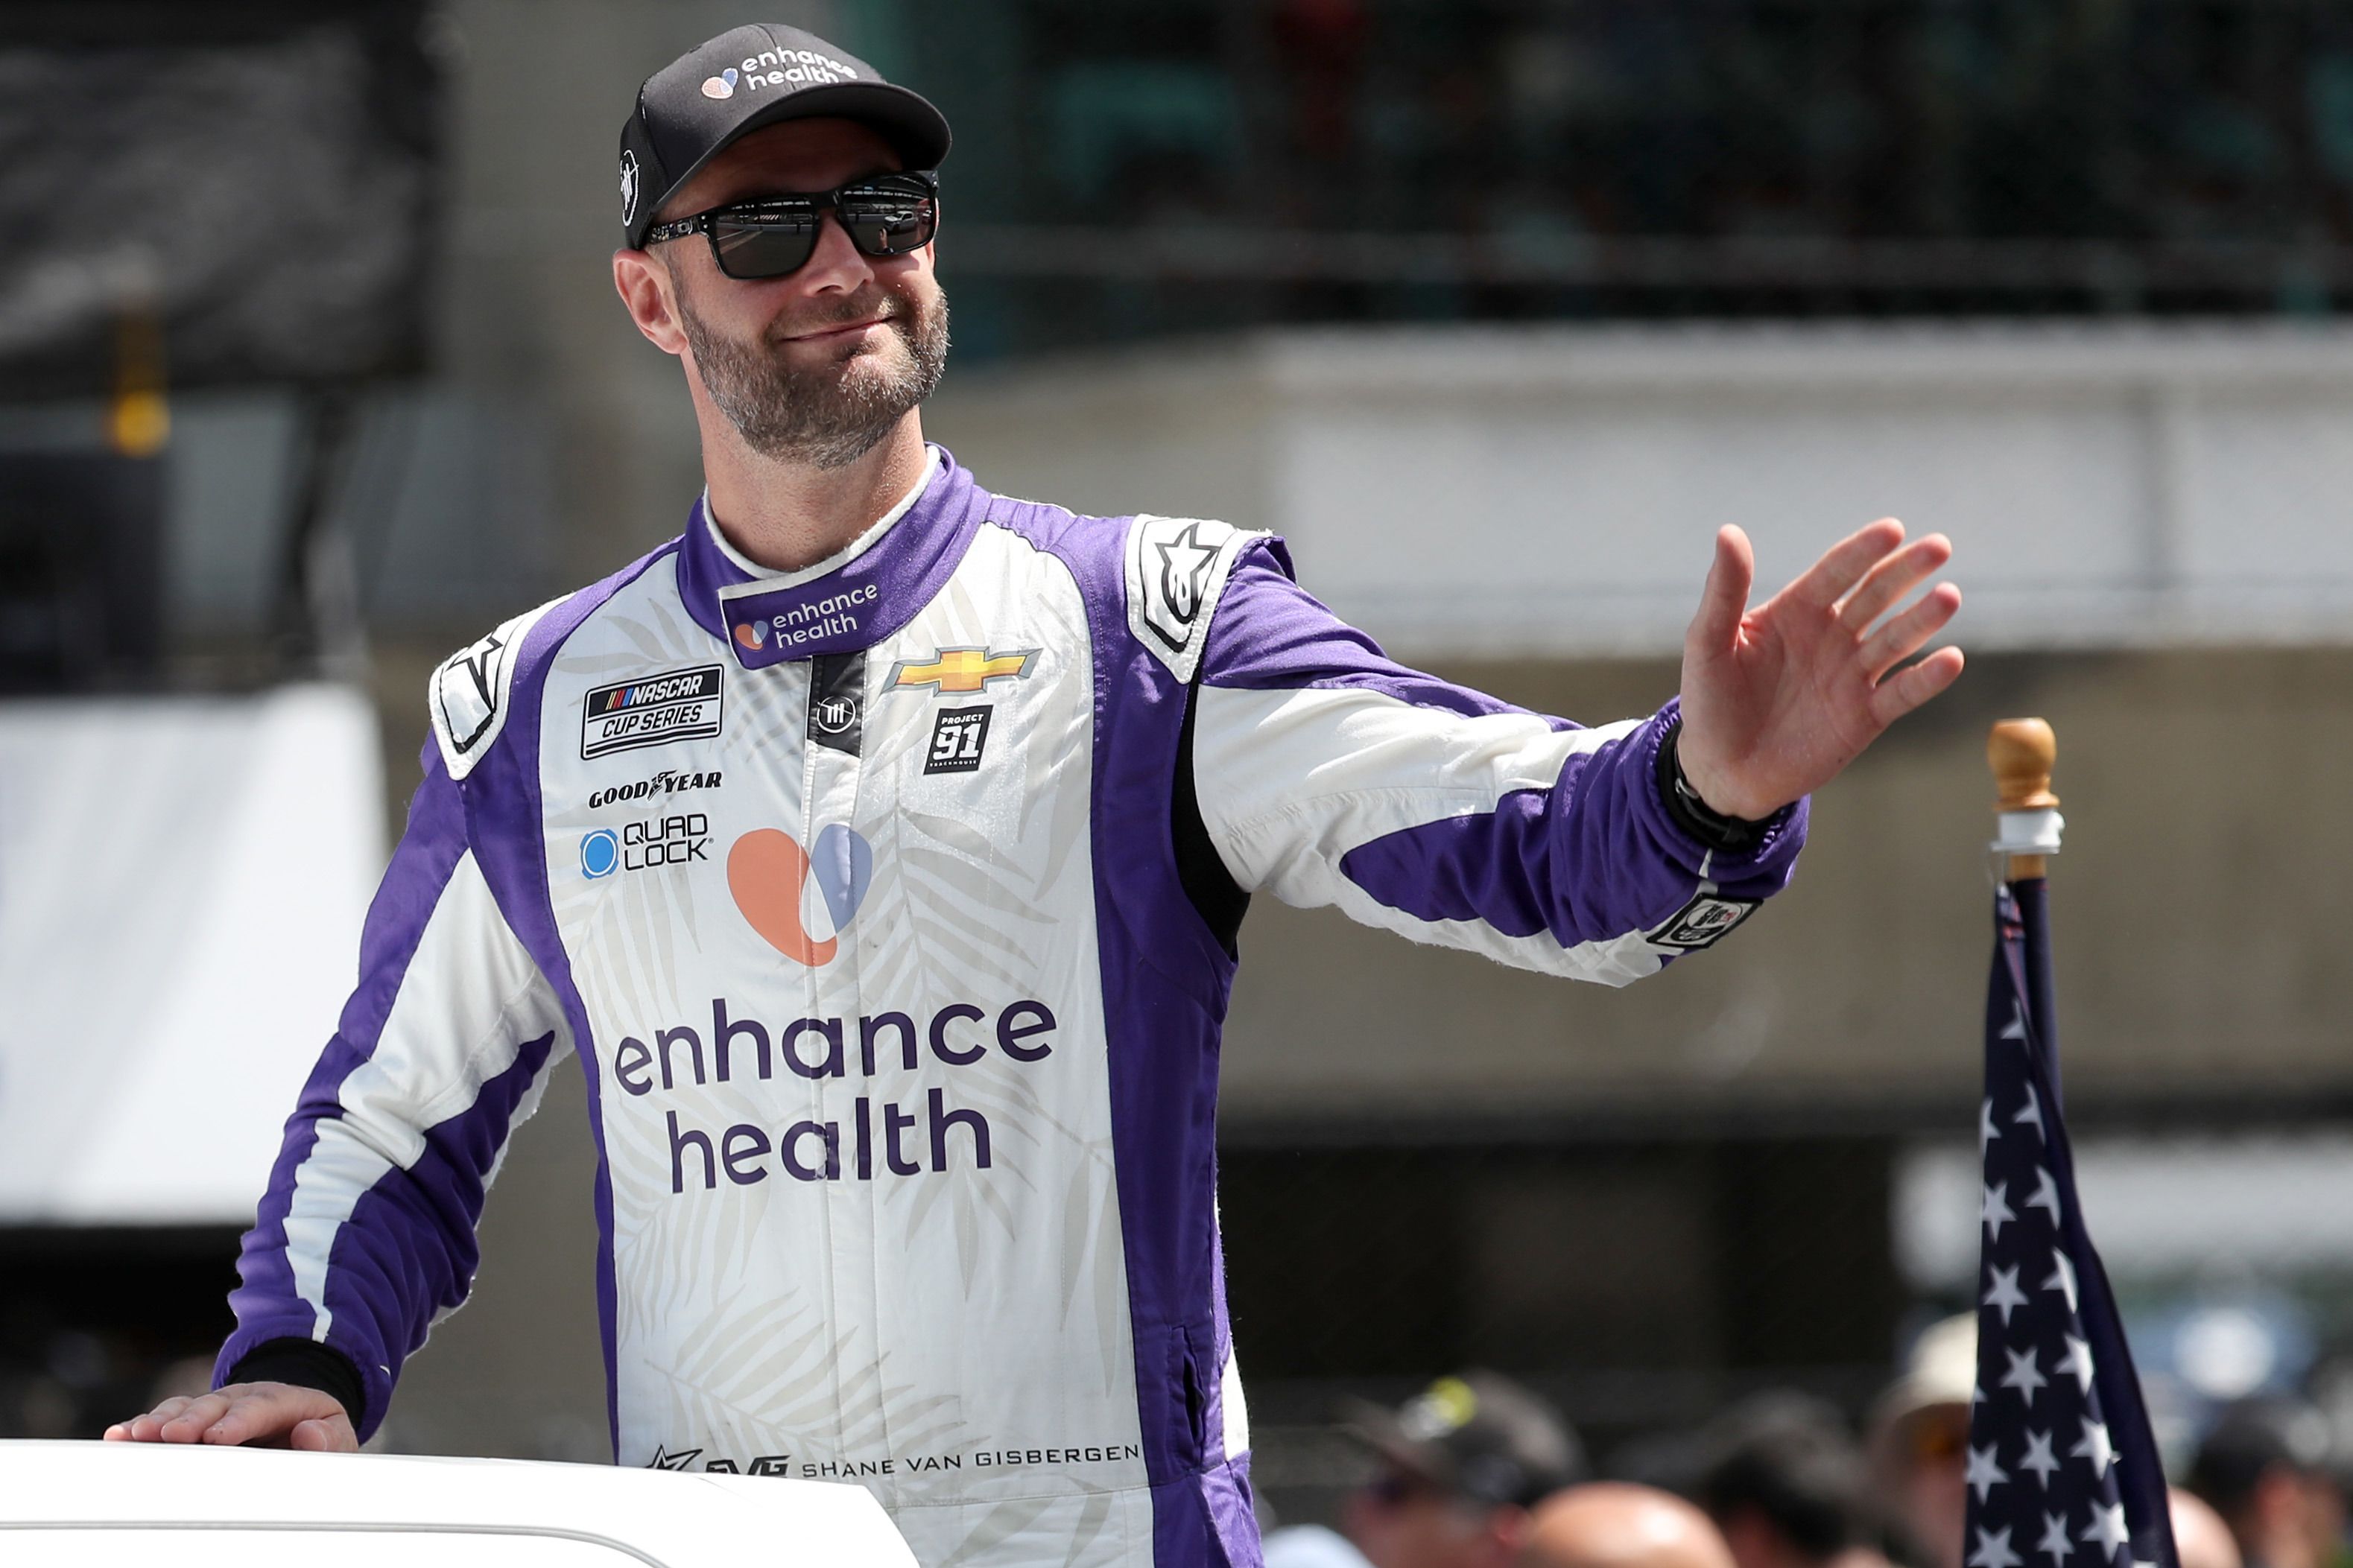 Shane van Gisbergen did the 'right thing' leaving Supercars for NASCAR